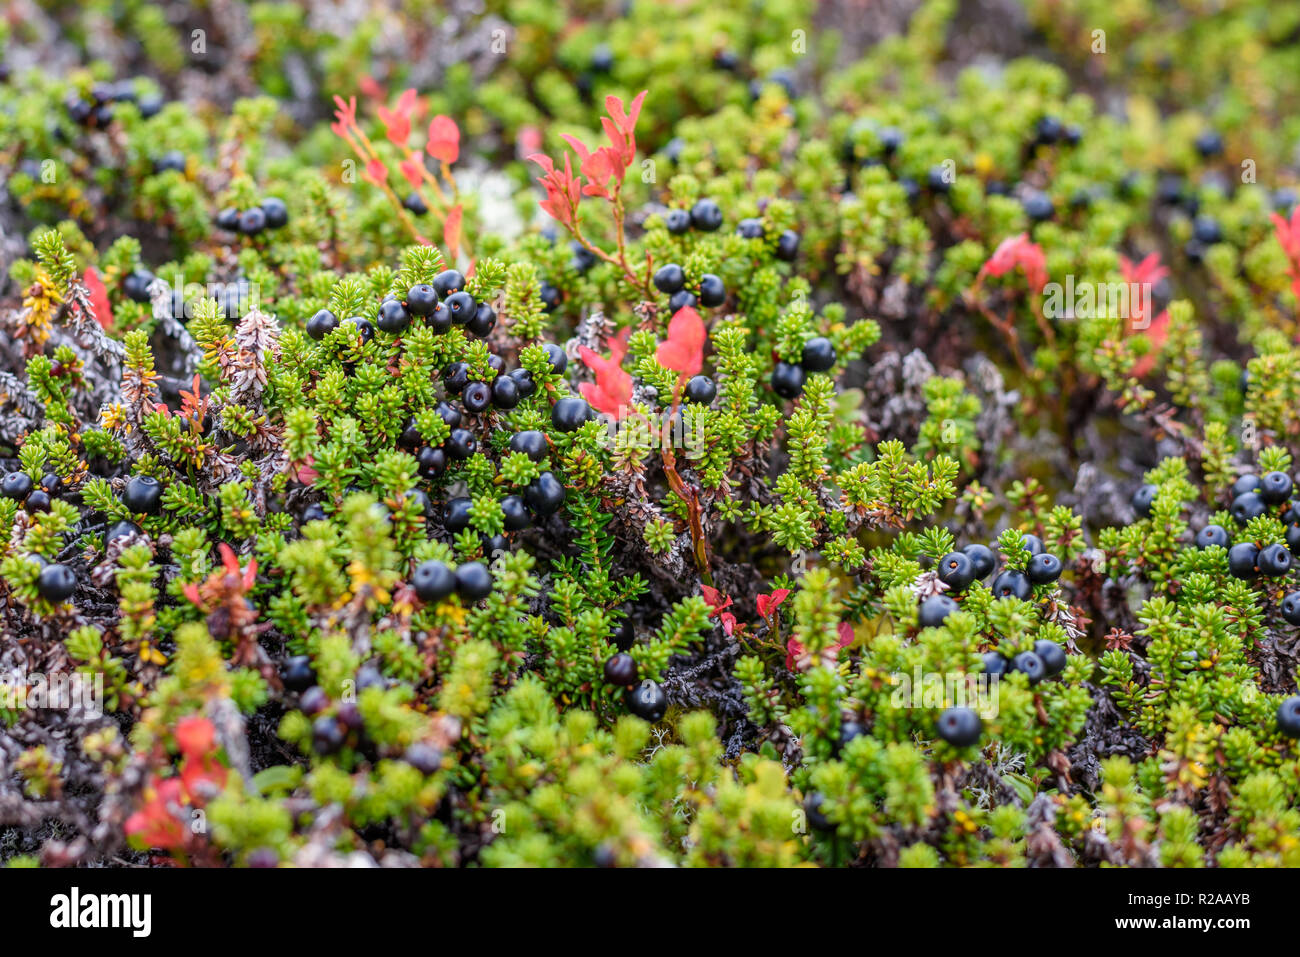 Crowberry, empetrum nigrum in its natural form in the forest Stock Photo